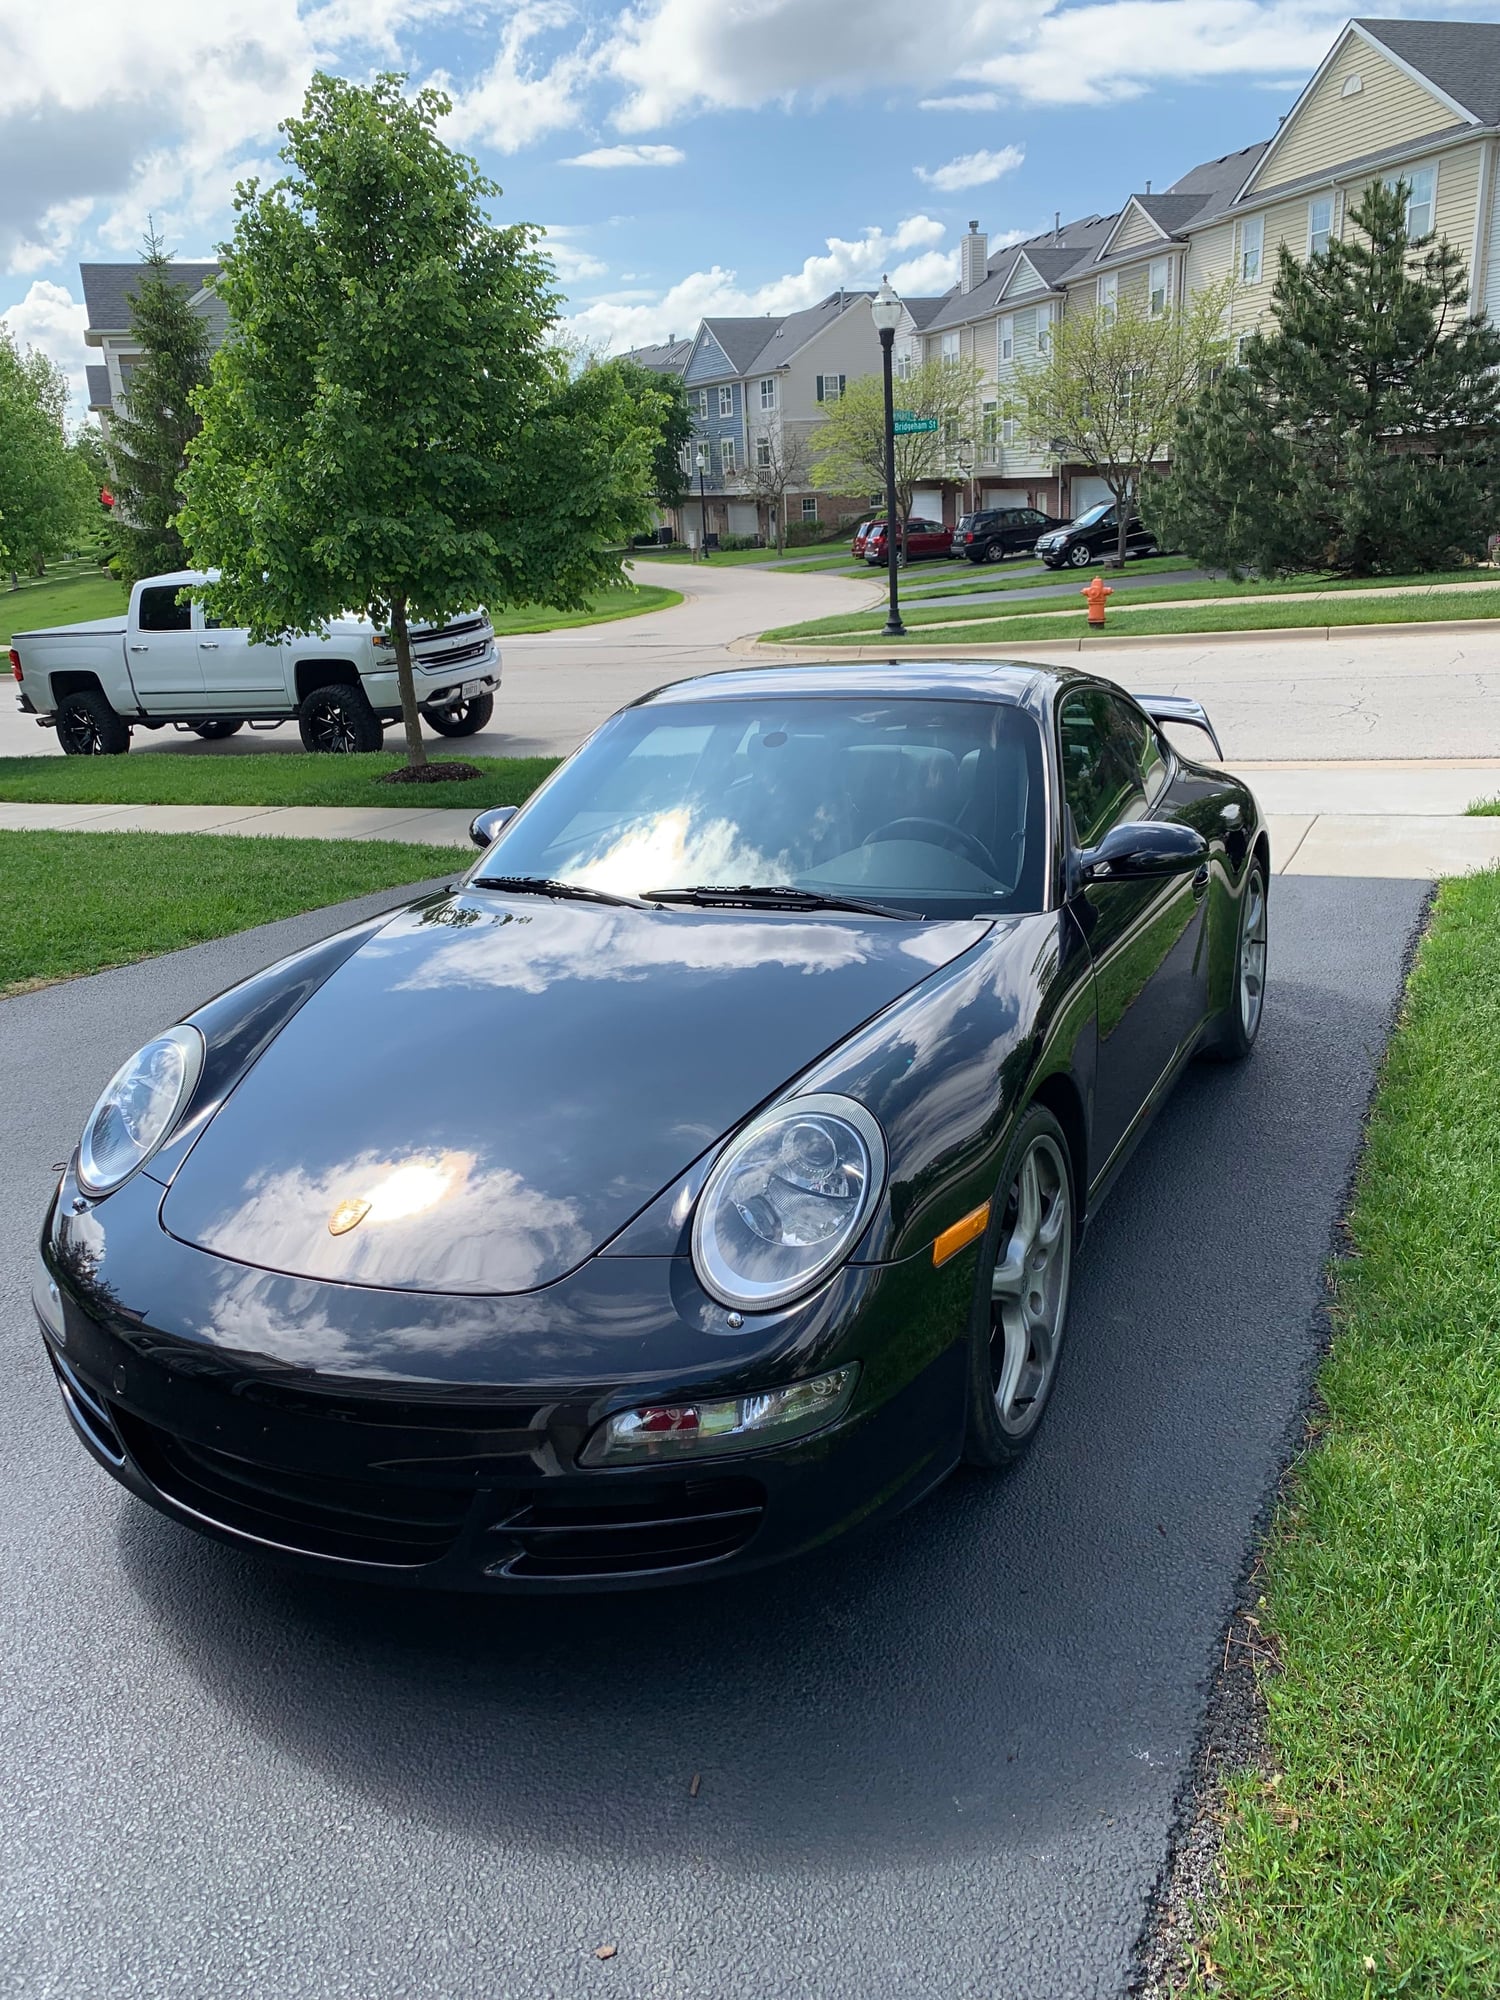 Exterior Body Parts - 997.1 GT2 Spoiler and Lid - Used - 2005 to 2012 Porsche 911 - Elgin, IL 60124, United States